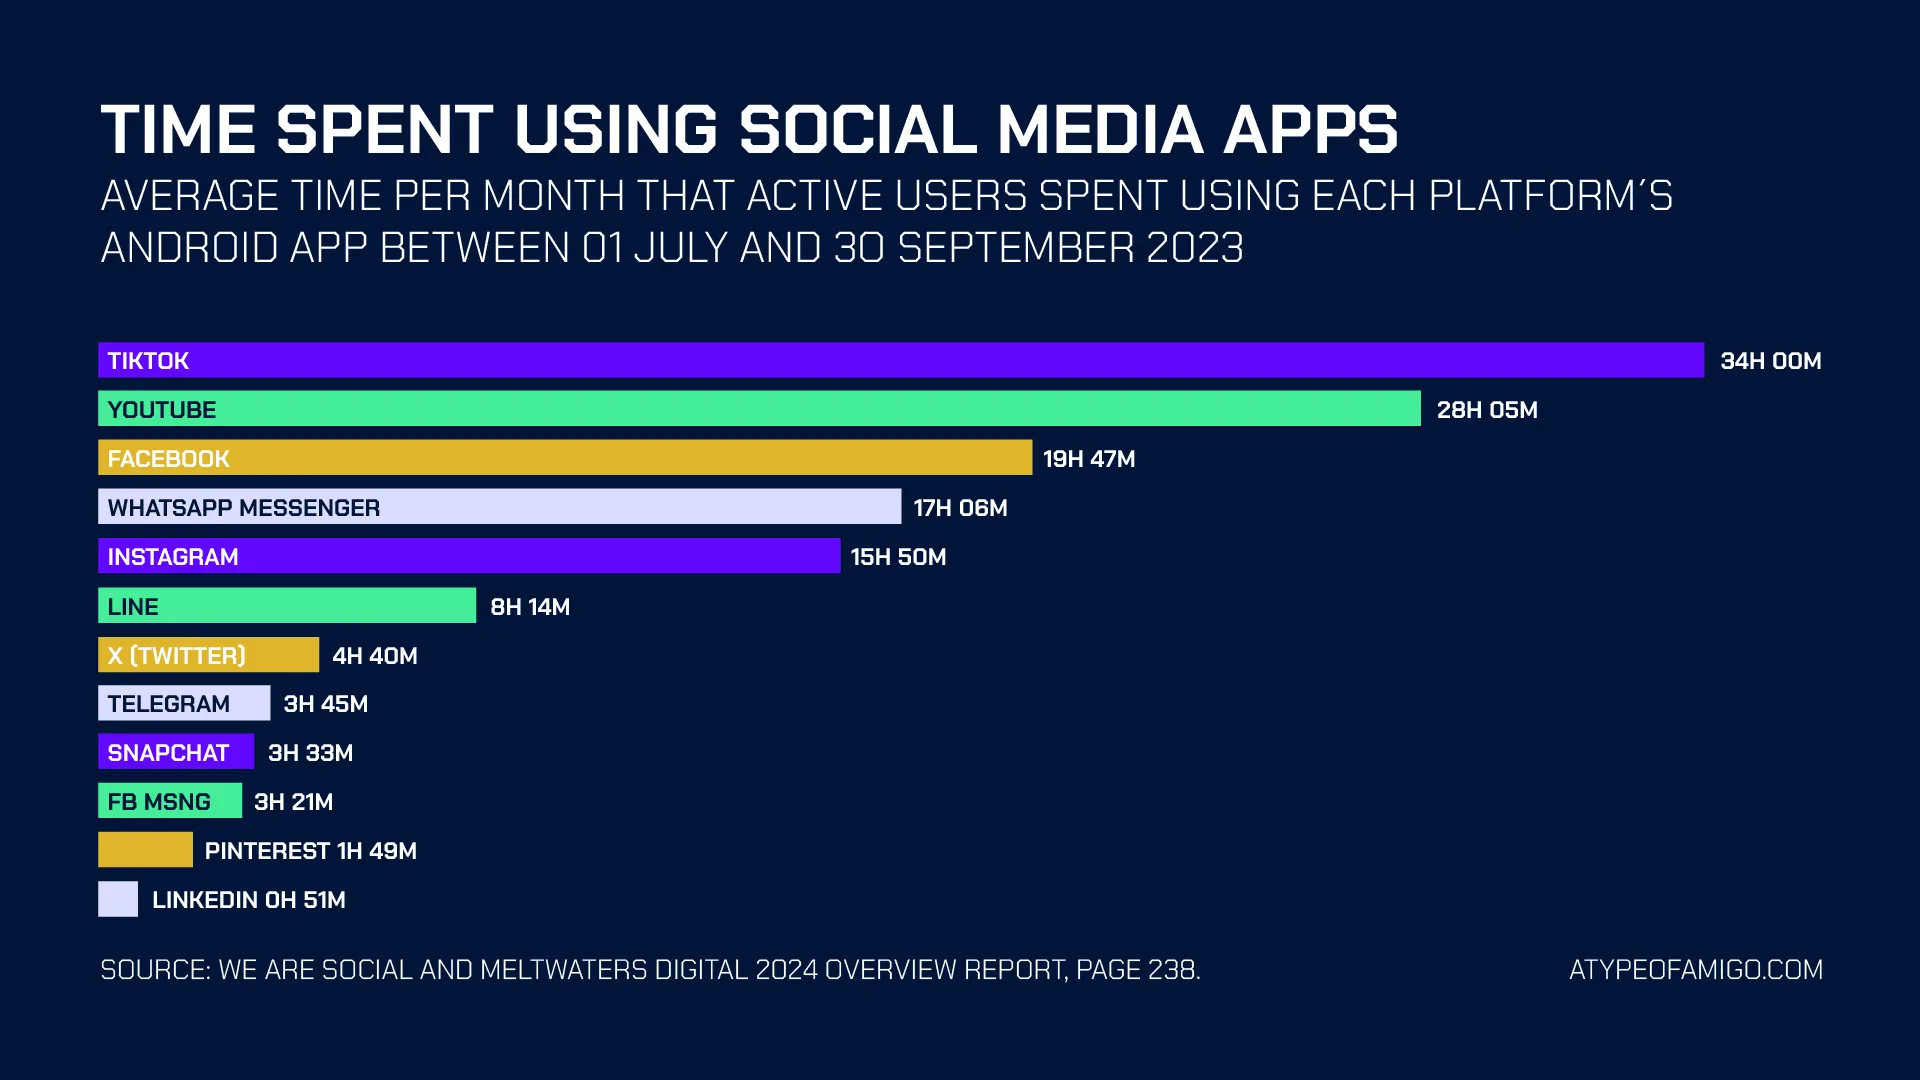 Average time per month that active users spent using each platform’s Android app between 01 july and 30 september 2023